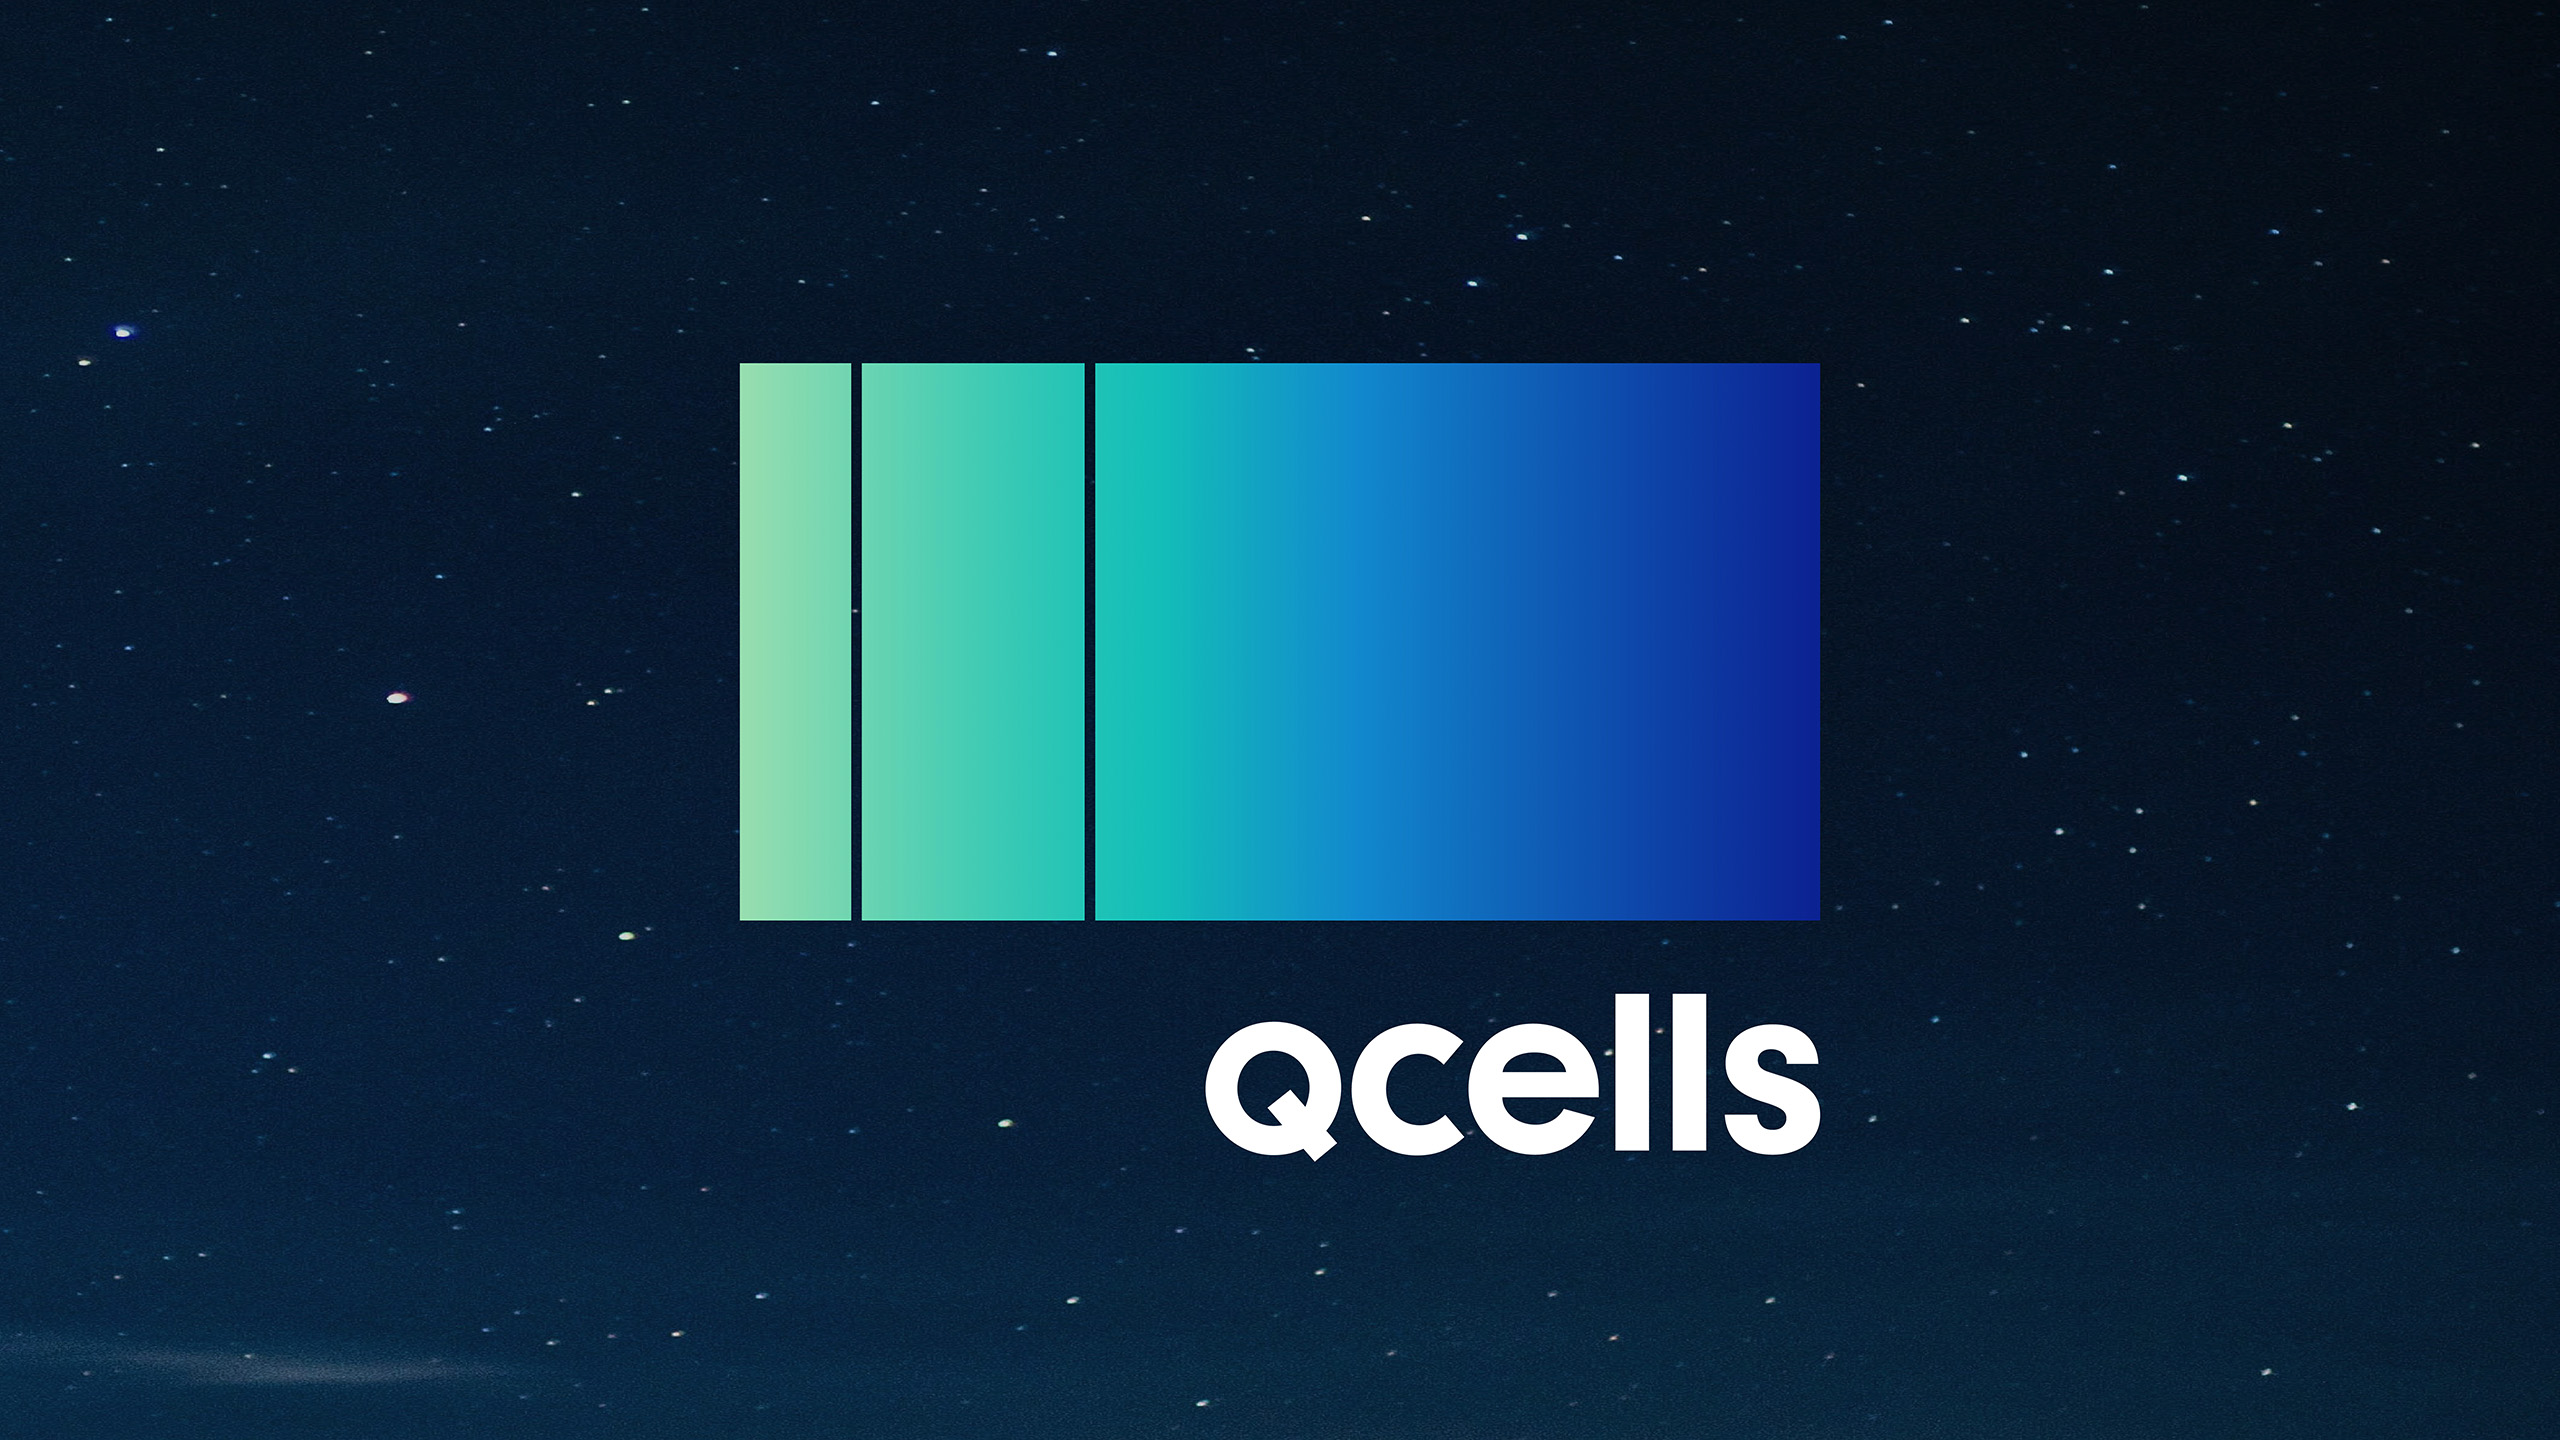 Qcells, Completely Clean Energy